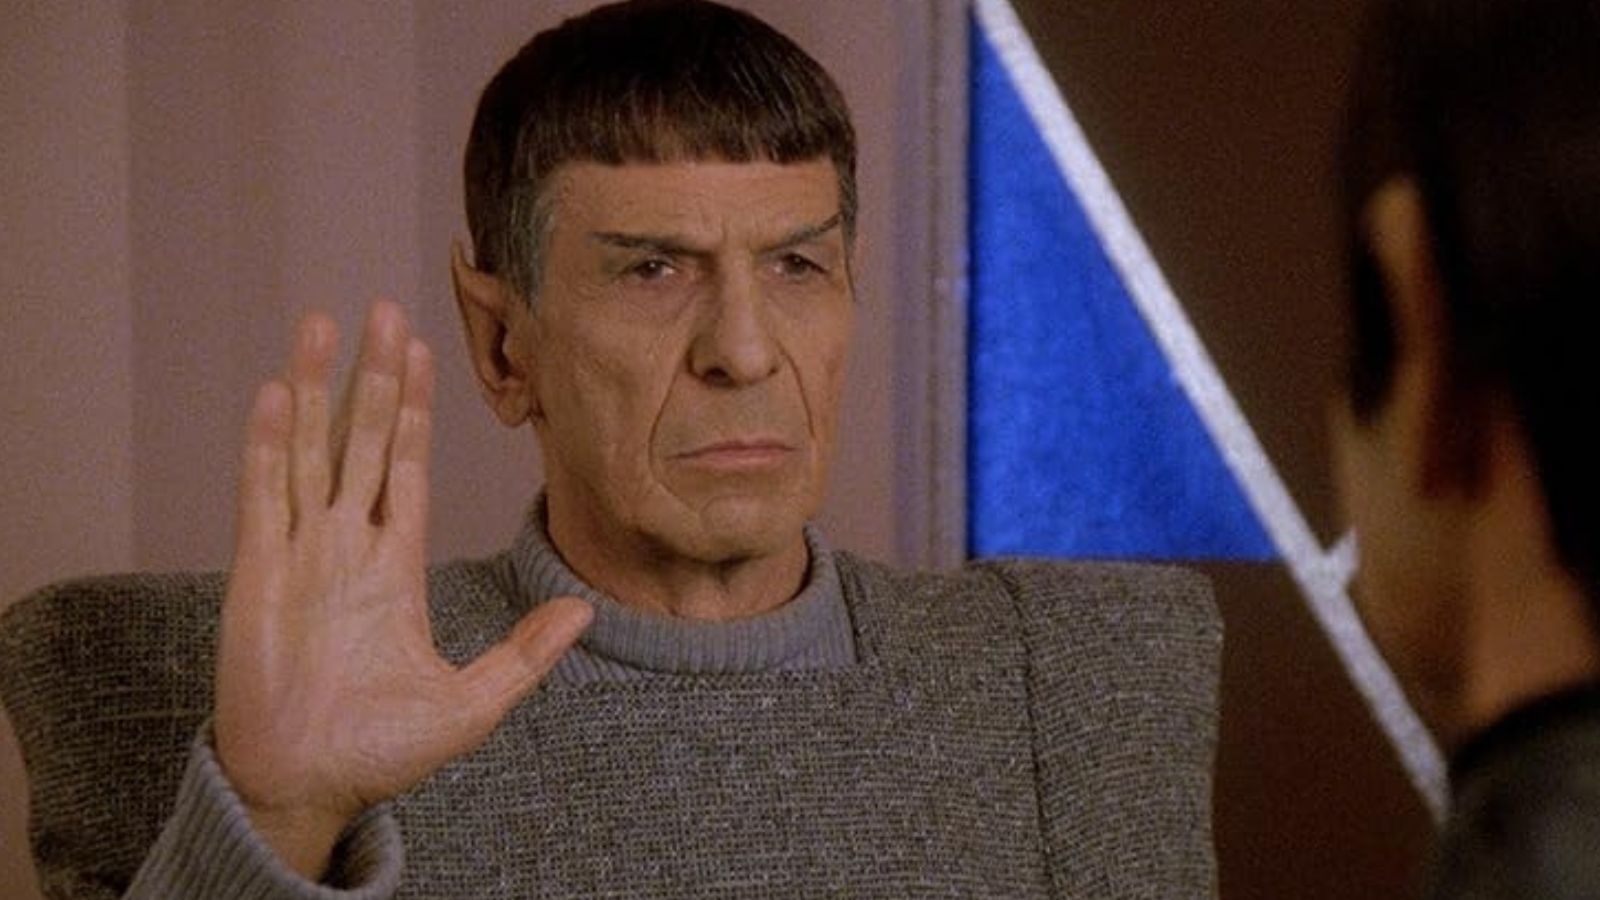 <span>“Live Long, and Prosper” – Vulcan Greeting.</span>  <span>I don’t care what age you are; we have all impersonated Spock at some point. </span>  <span>With his pointy ears and dry, emotionless demeanor, we’ve all been caught trying to sound or look like the legendary character played by Leonard Nimoy.</span>